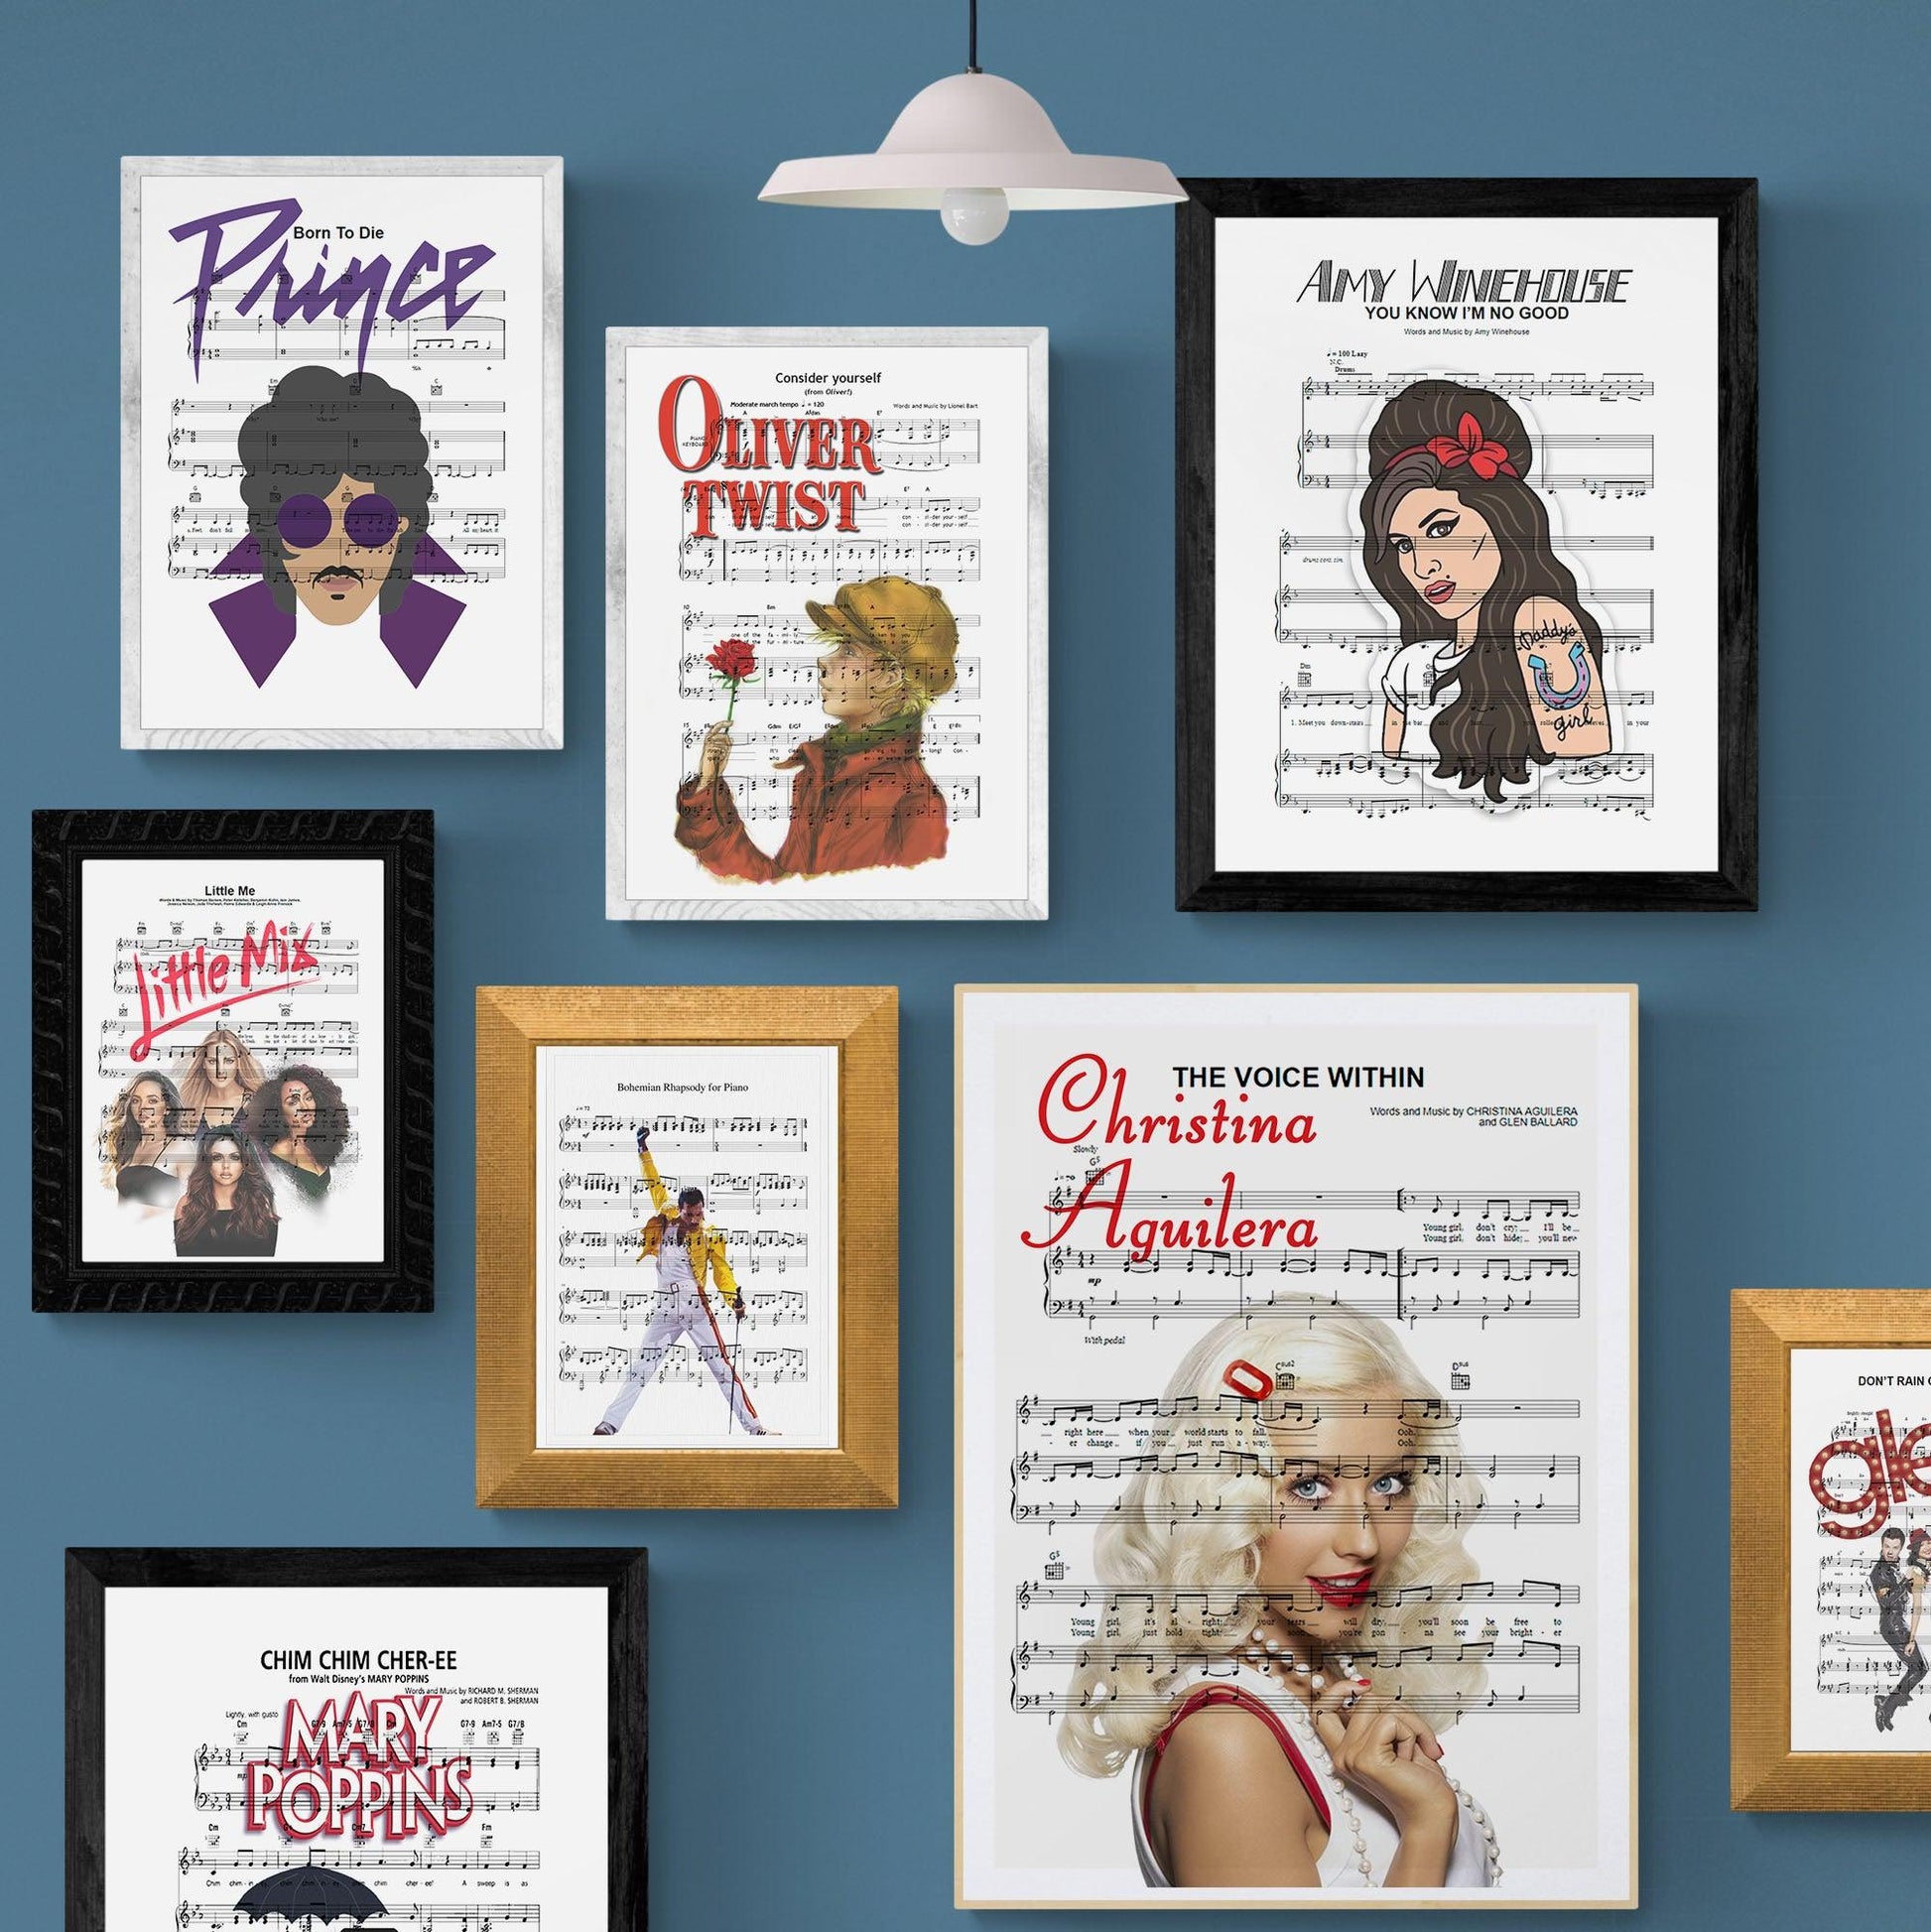 Christina Aguilera - The Voice Within Print - 98types